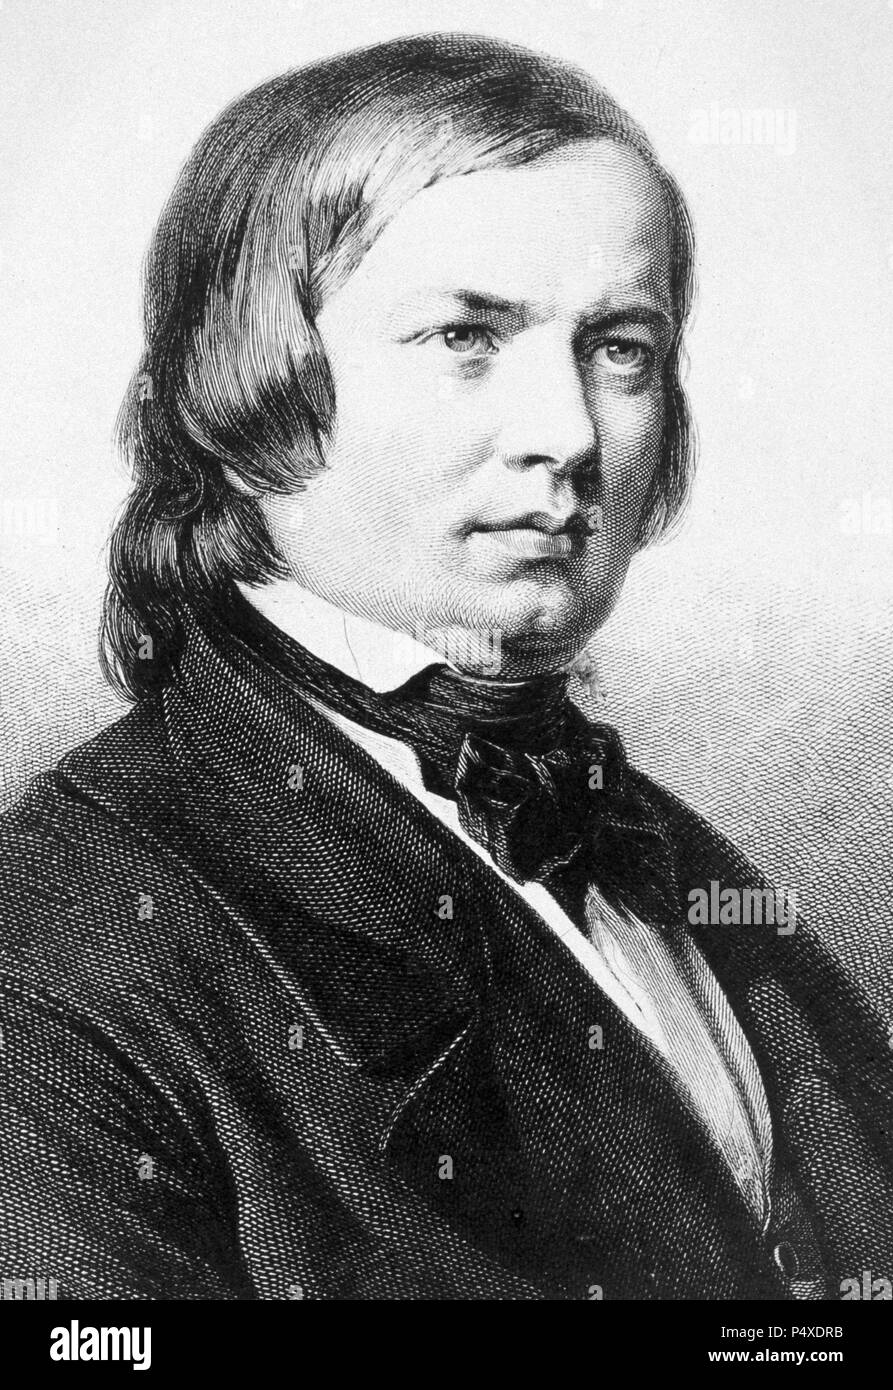 Robert Schumann, 1810-1856. German composer, pianist, conductor and music critic. Composed concertos, chamber, orchestral, songs and piano works. Stock Photo